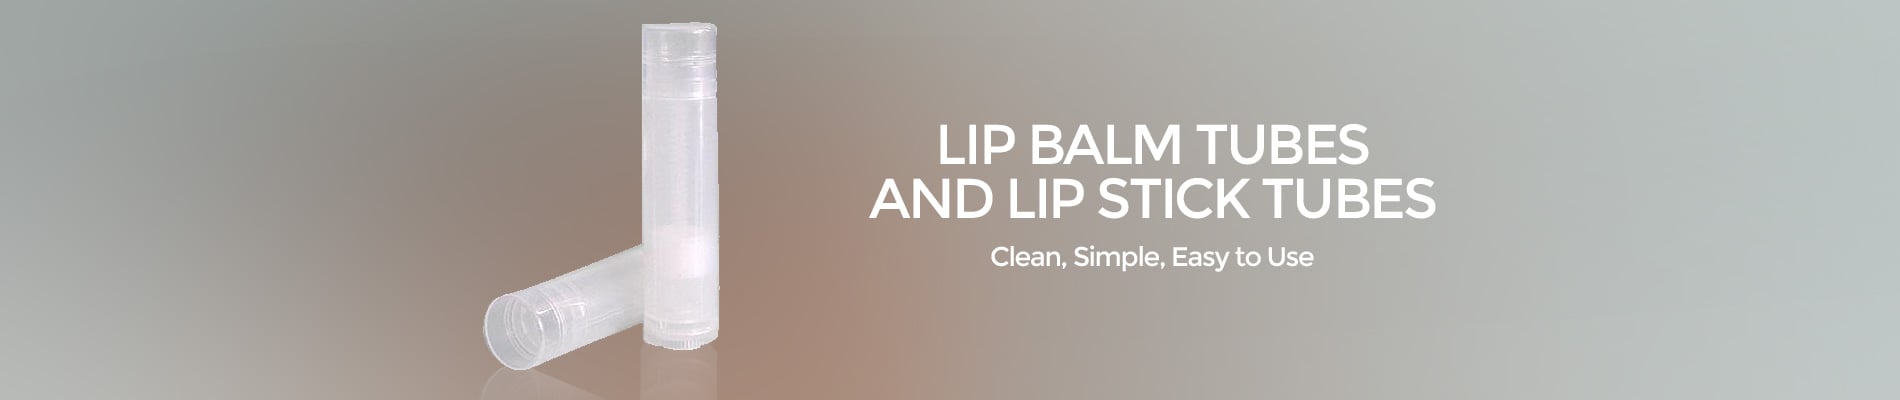 Lip Balm Tubes & Lip Stick Tubes at Wholesale Prices from New Directions Aromatics